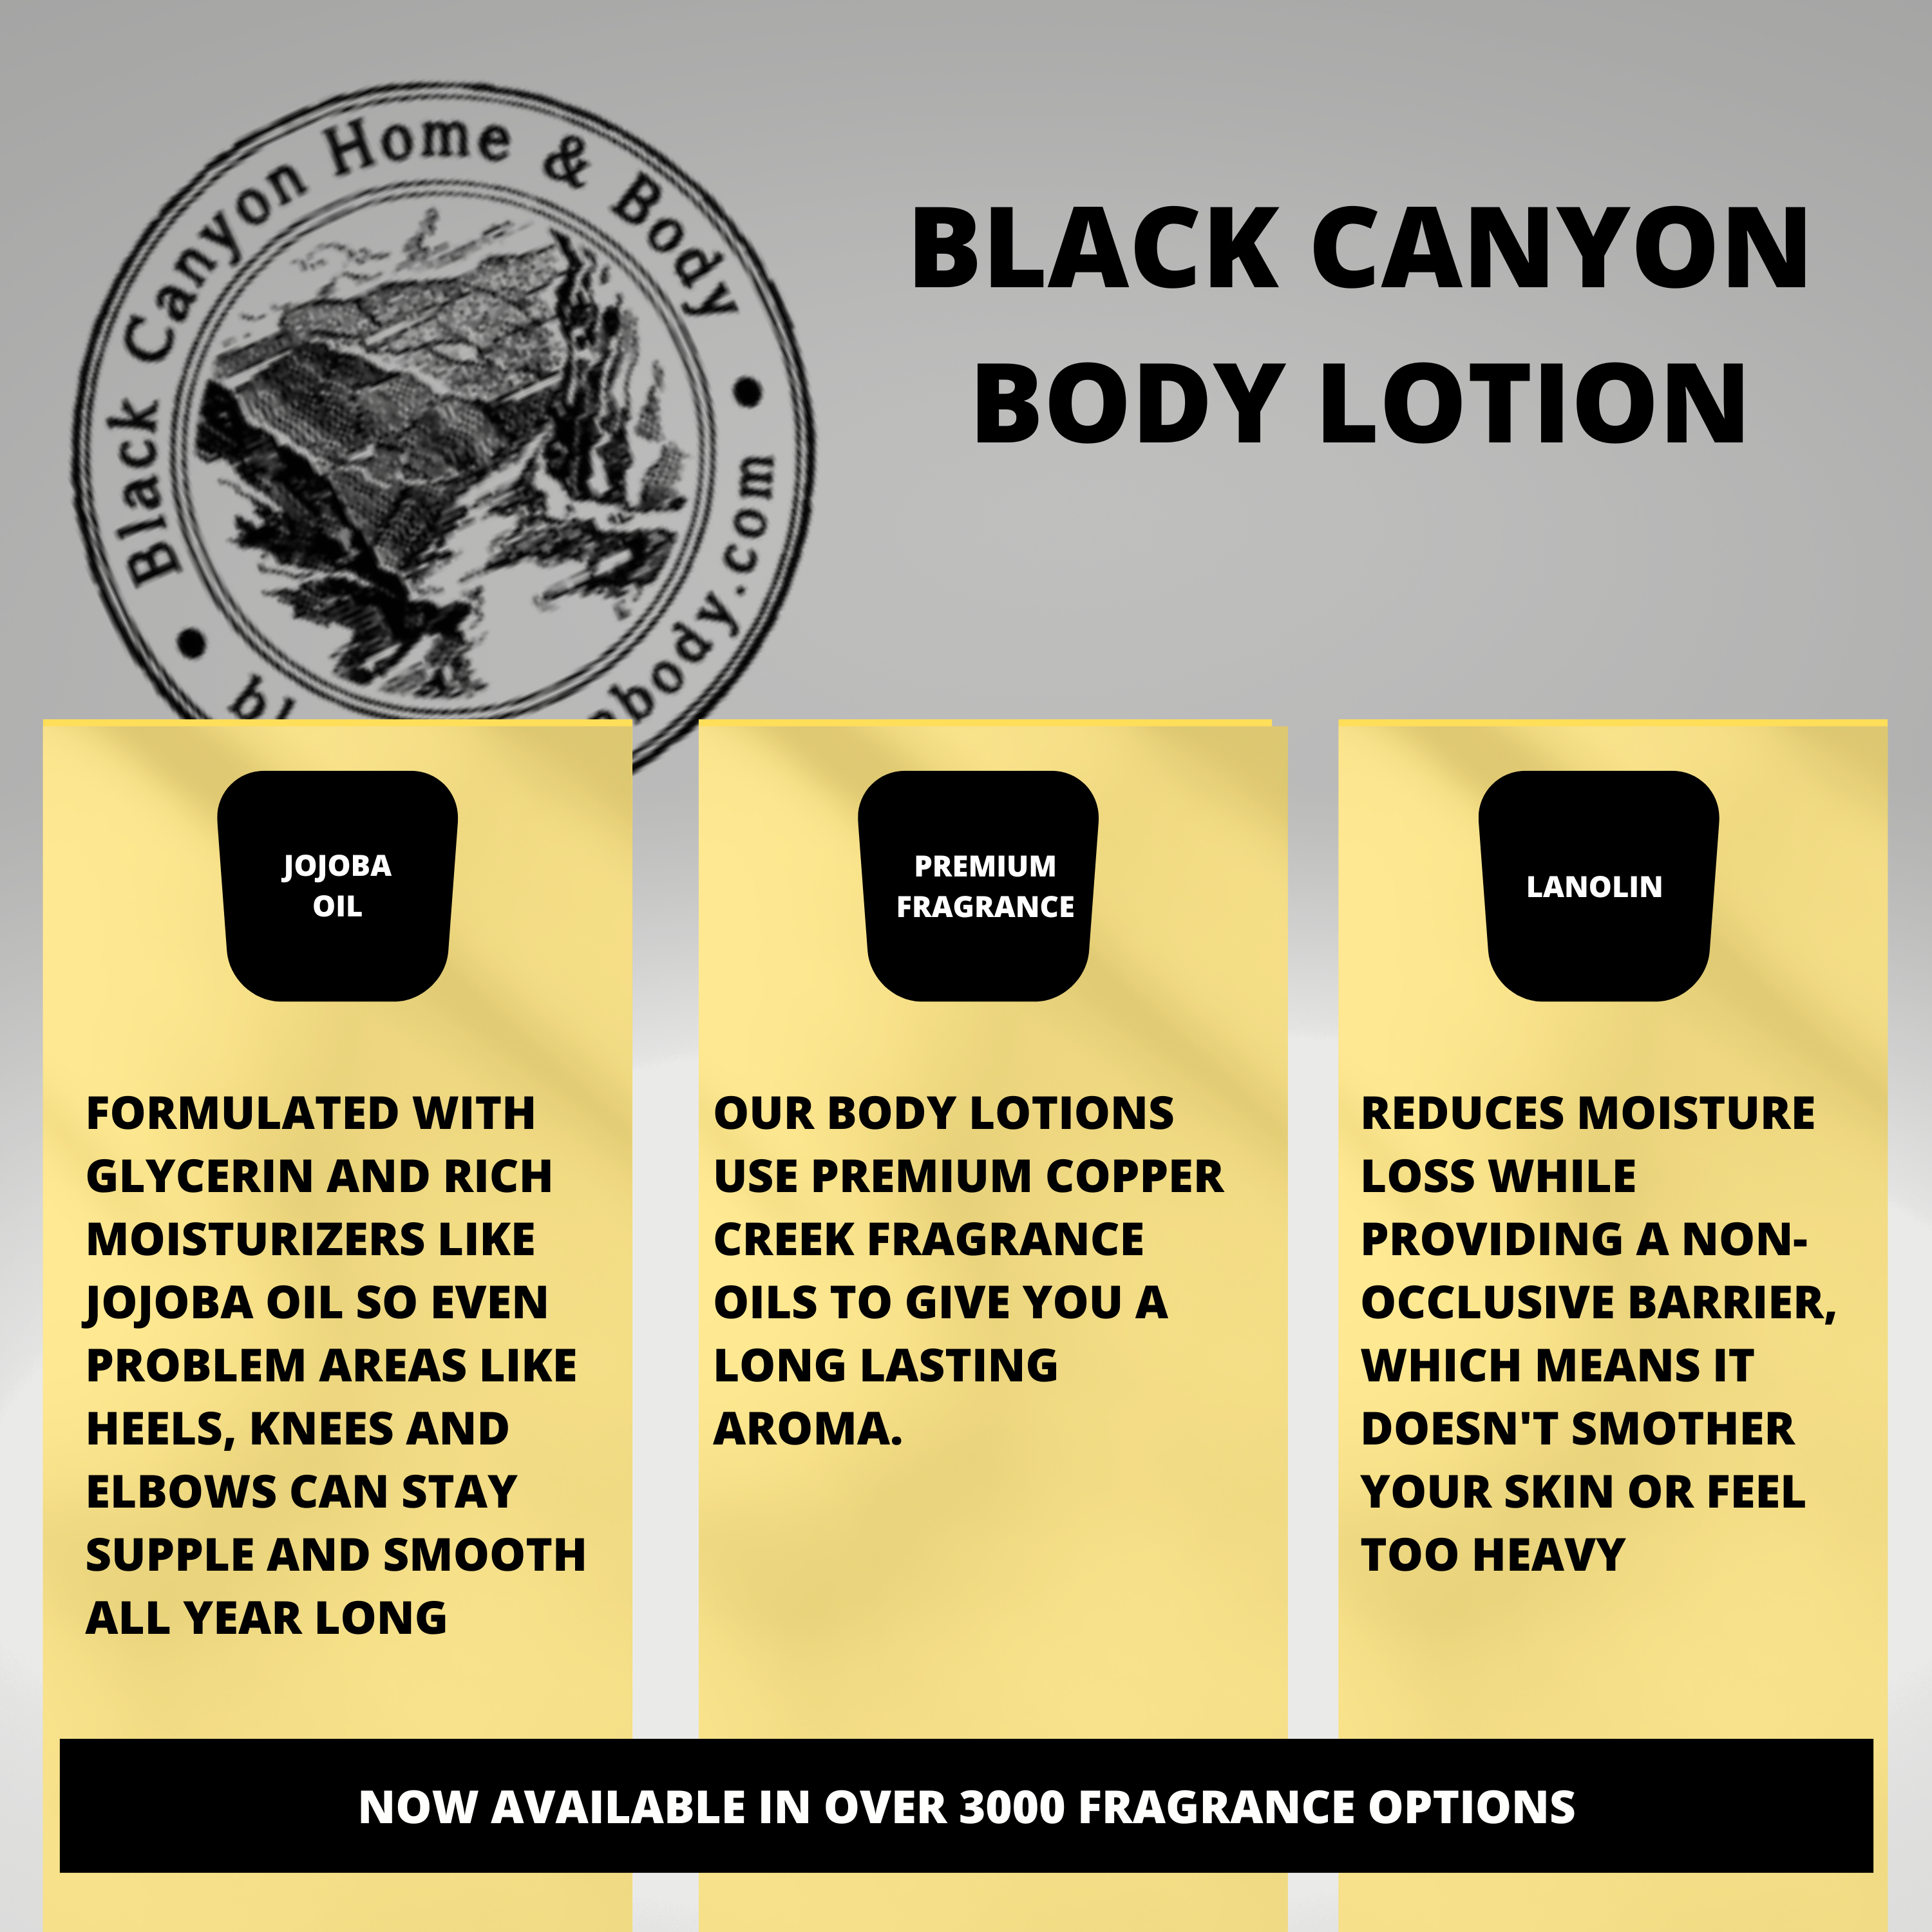 Black Canyon Pumpkin Bread & Coconut Scented Luxury Body Lotion with Lanolin and Jojoba Oil